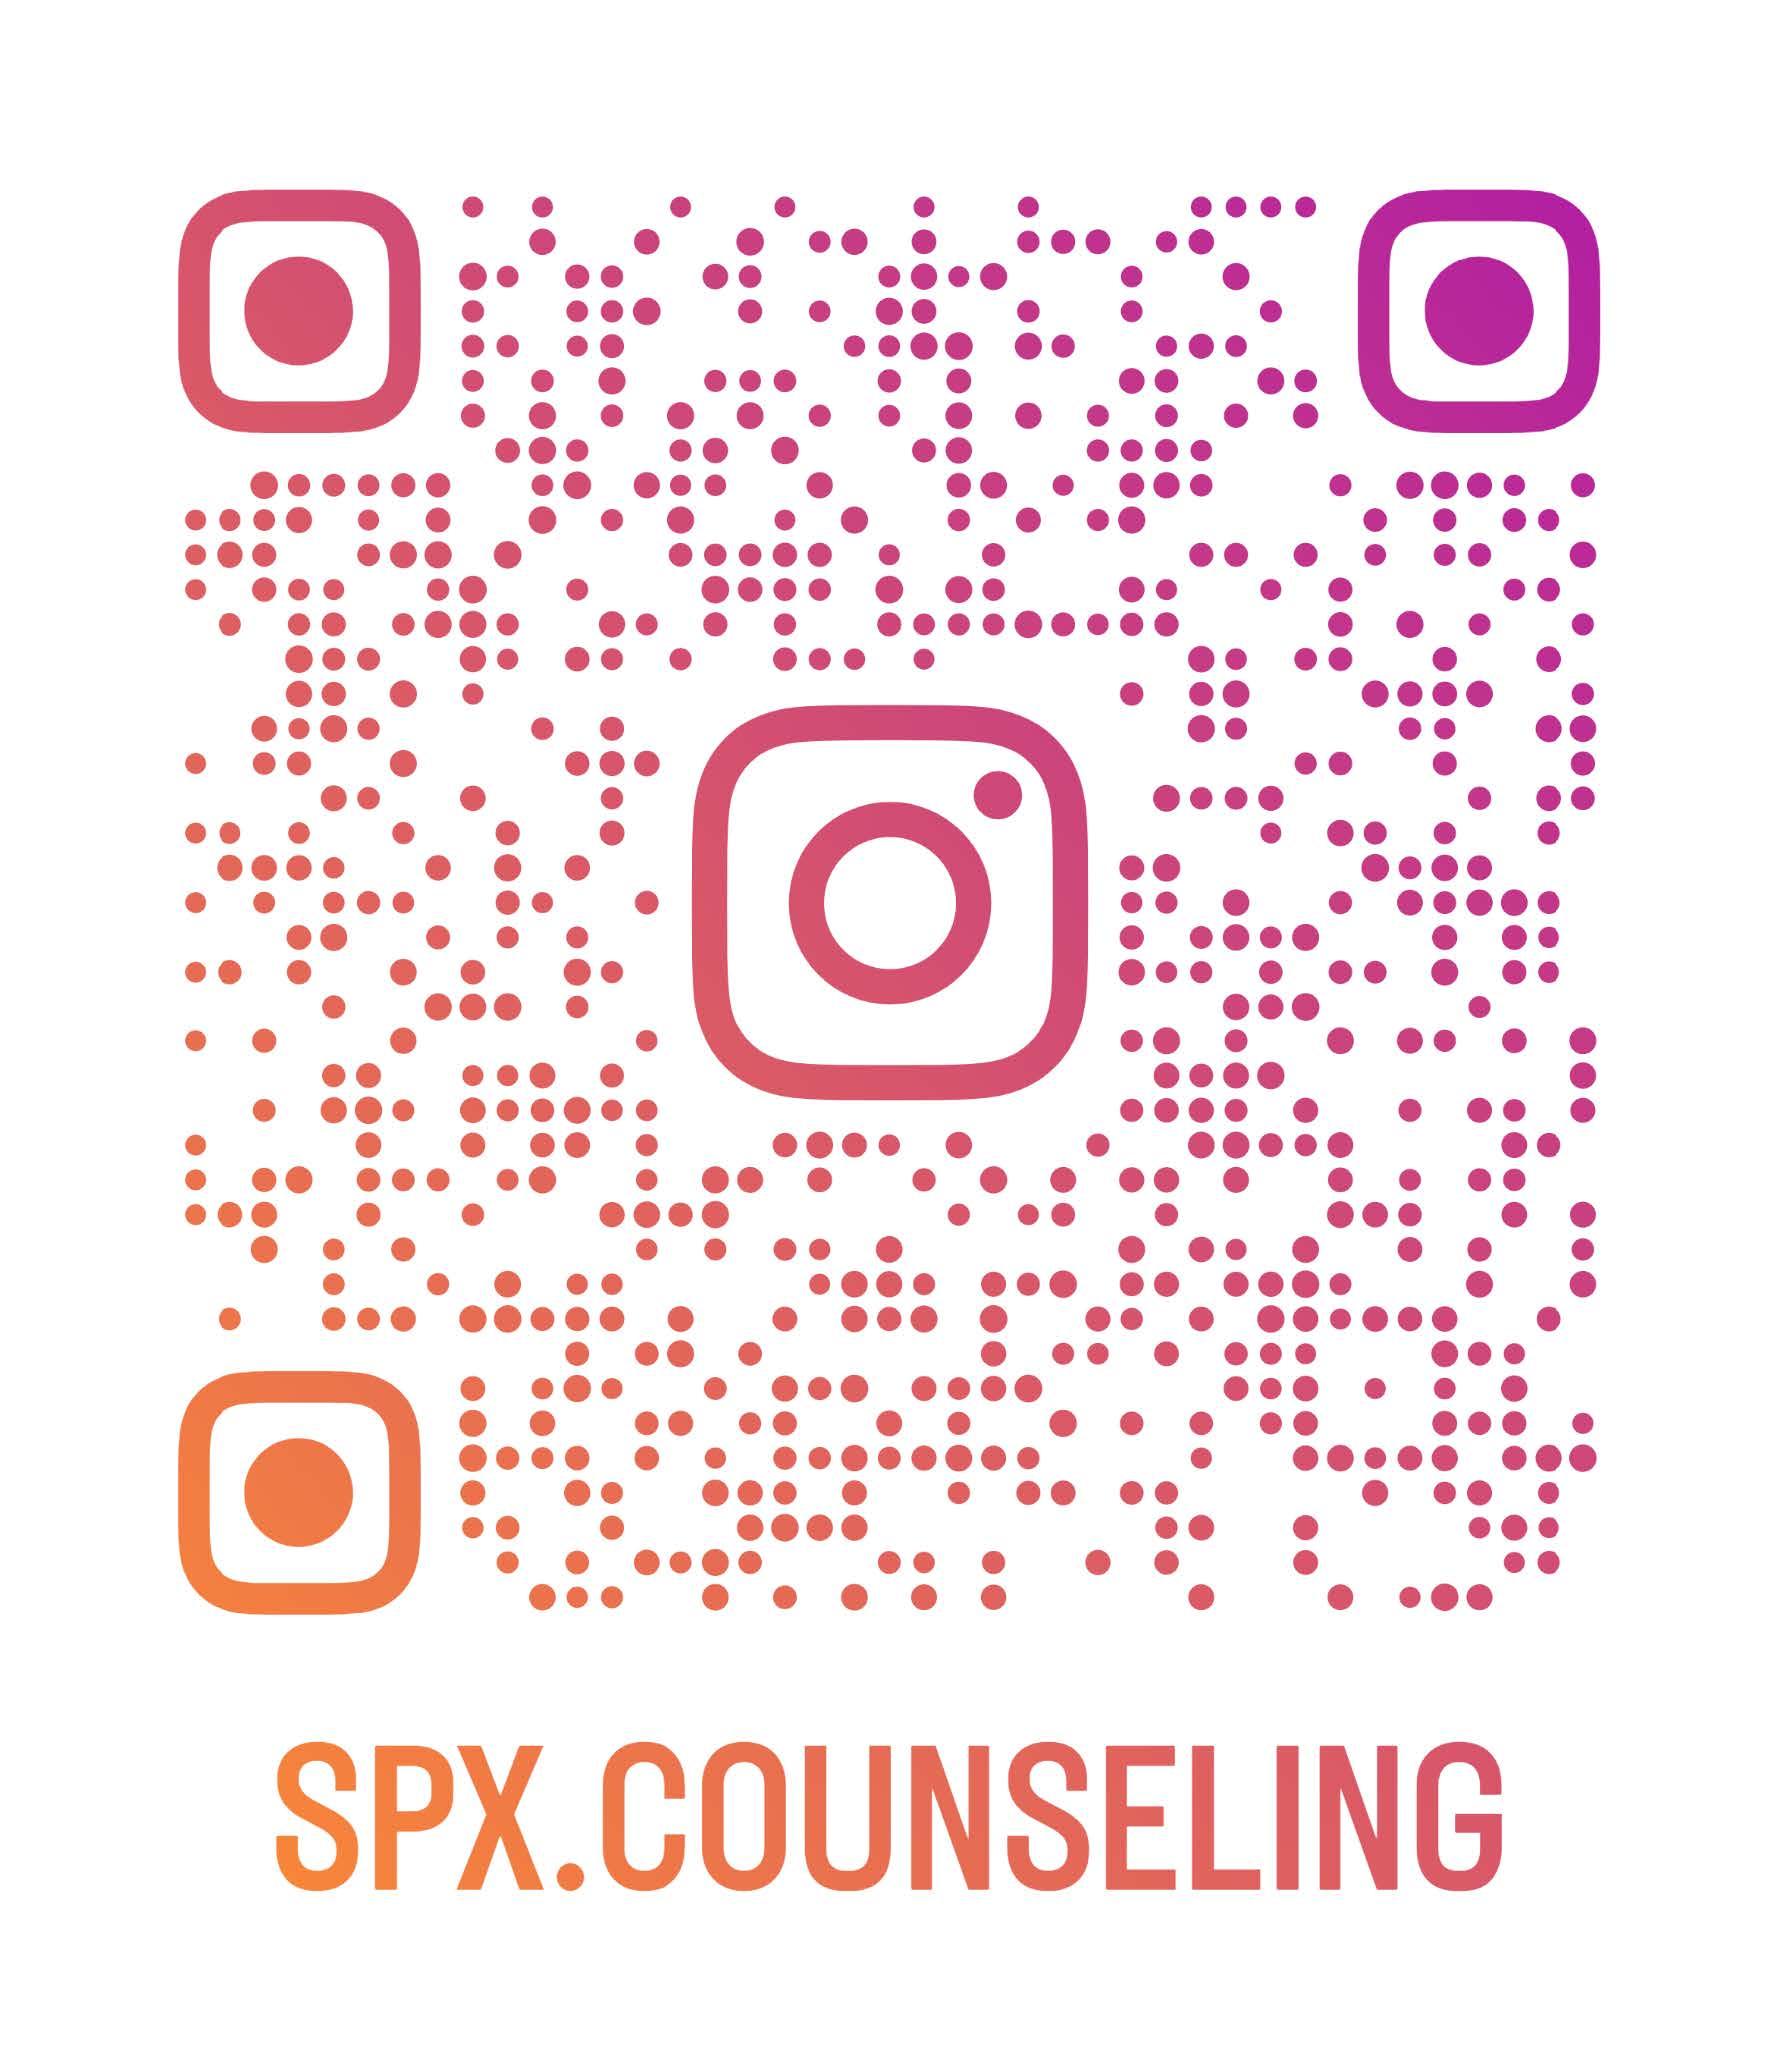 SPX Counseling